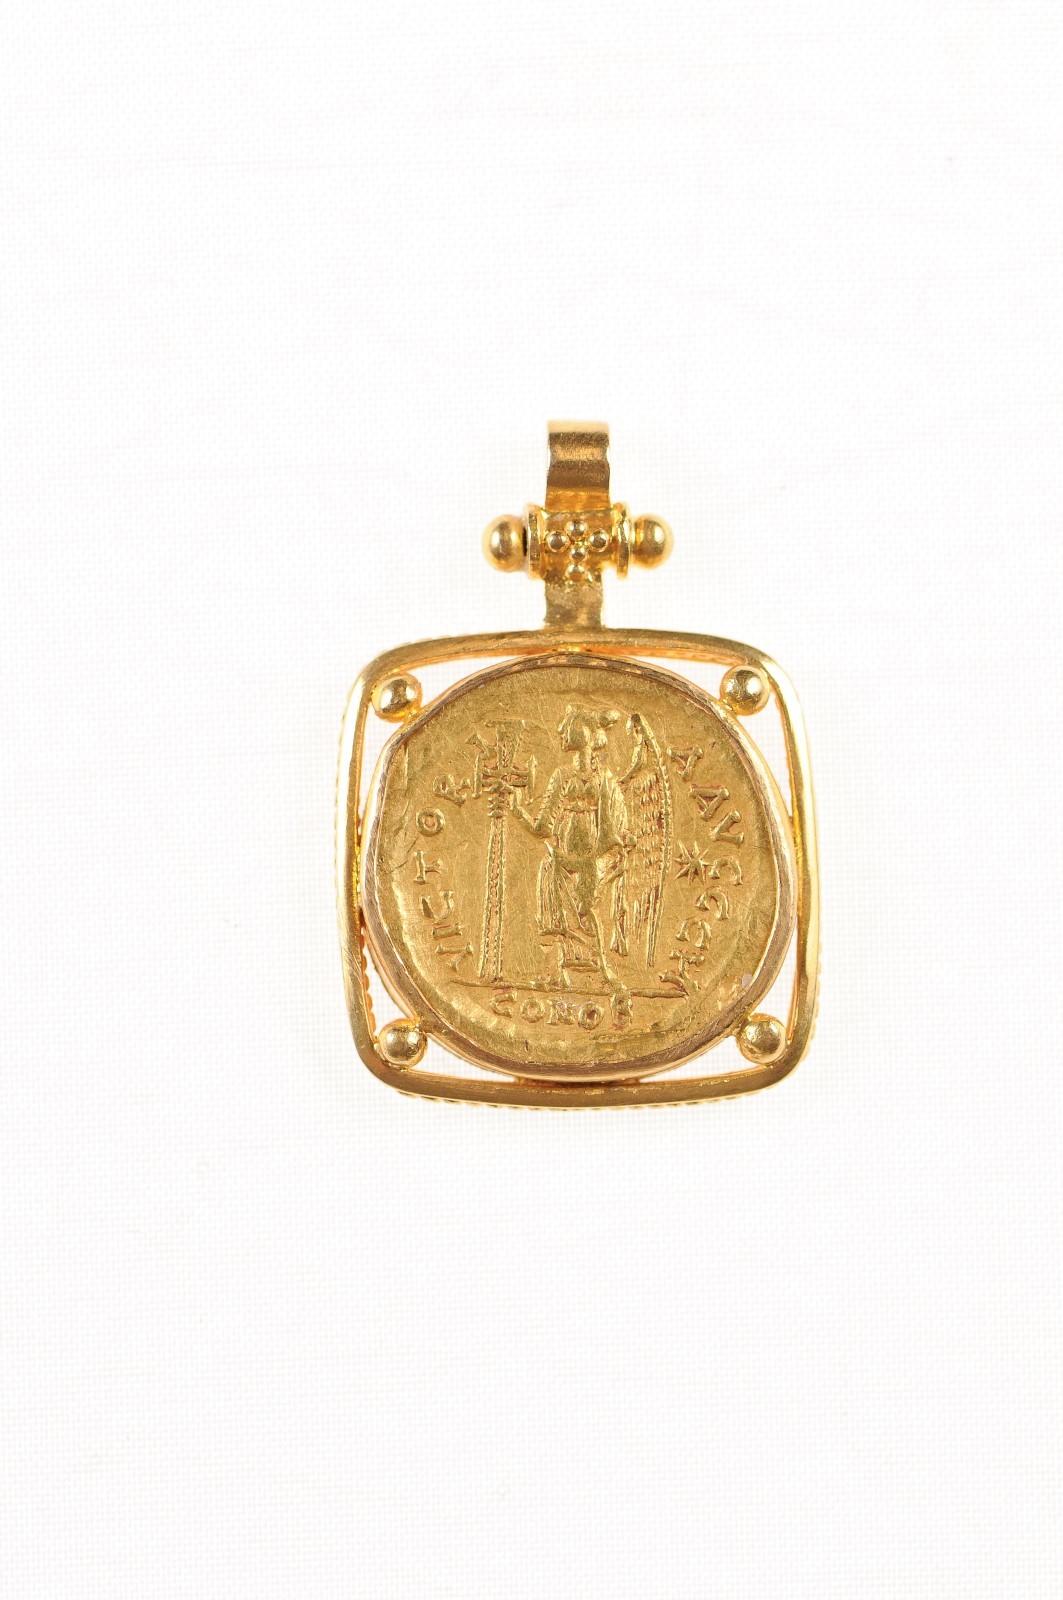 An authentic Zeno the Second Reign, AV Gold Solidus Roman Imperial Coin (Constantinople Mint, circa 476-491 AD), set in a squared 22k gold bezel with 22k gold bail. The obverse, or front, side of this coin features the Pearl diademed, helmeted, and